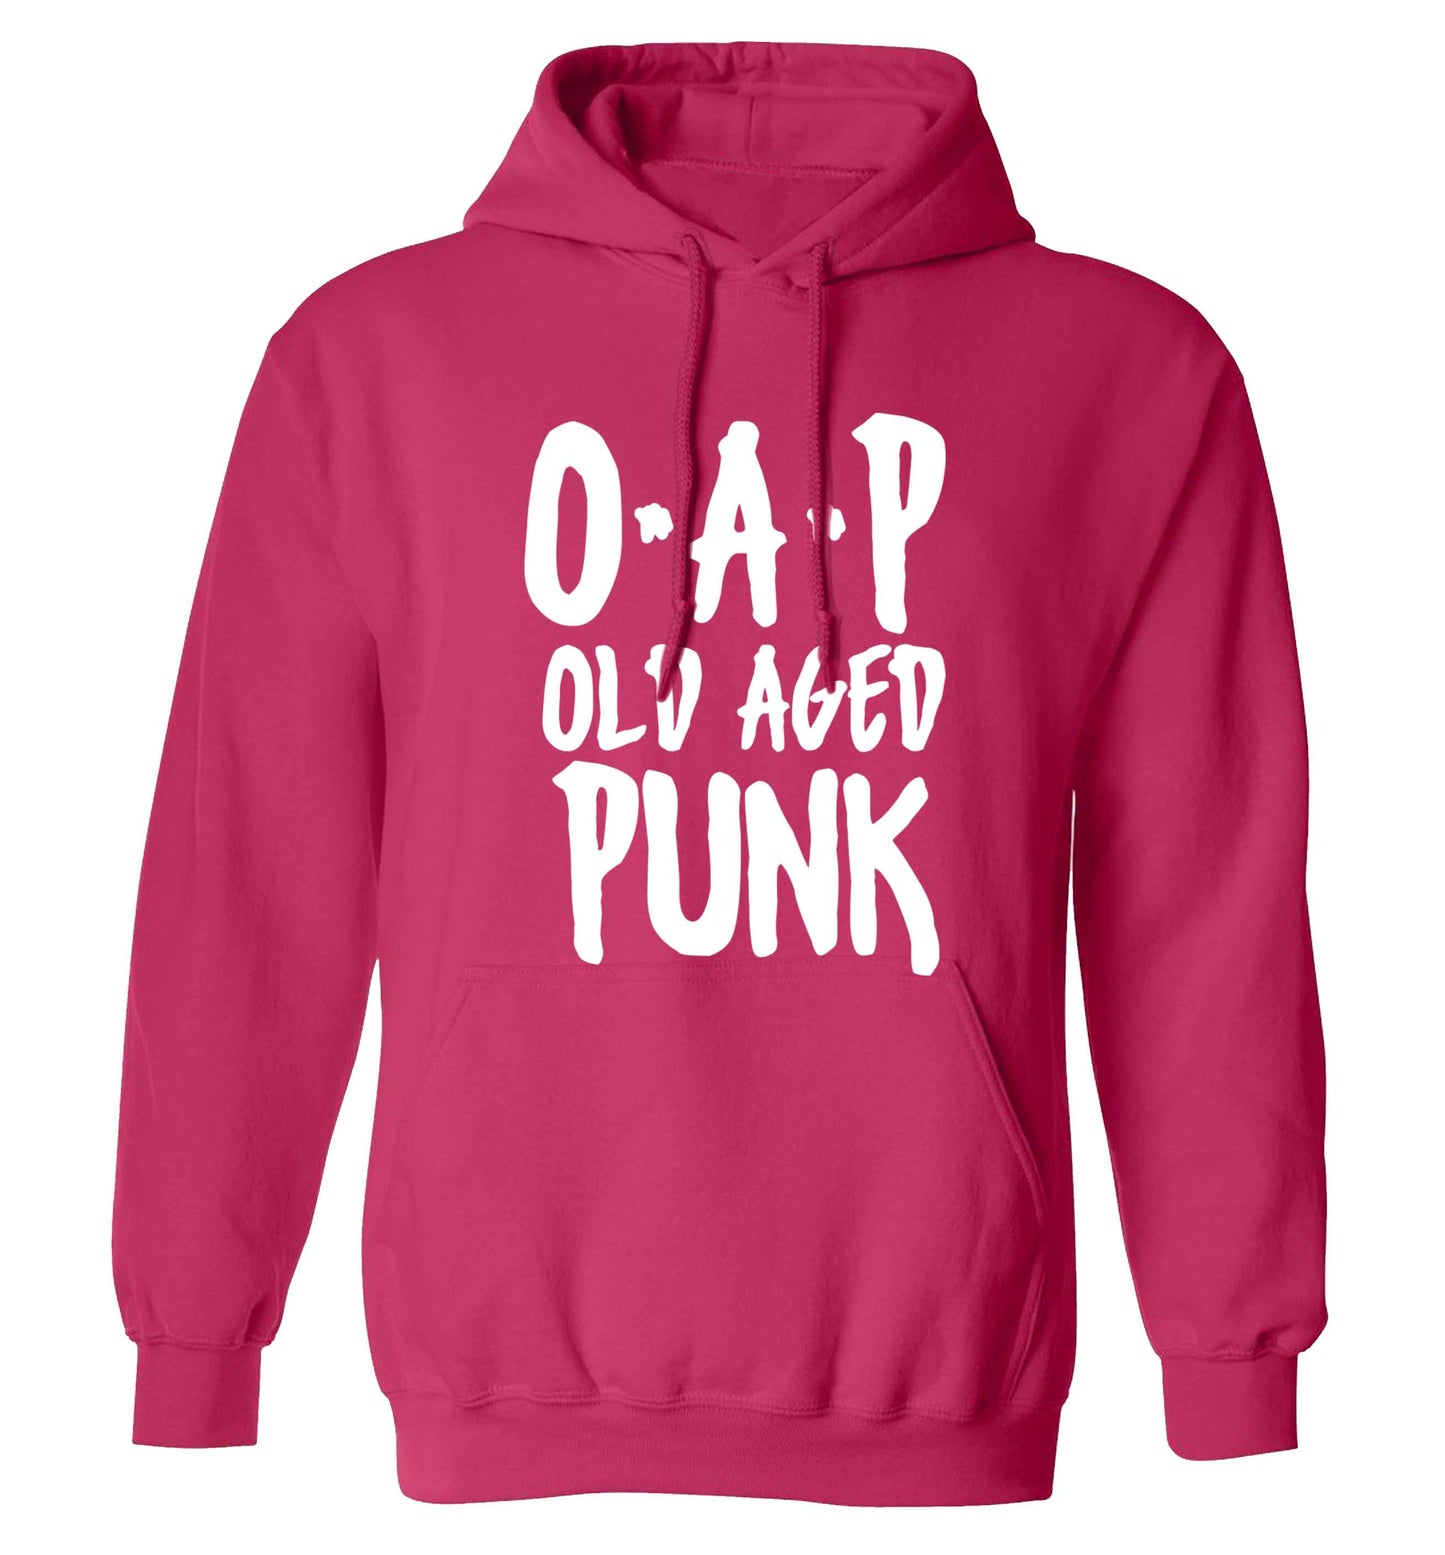 O.A.P Old Age Punk adults unisex pink hoodie 2XL